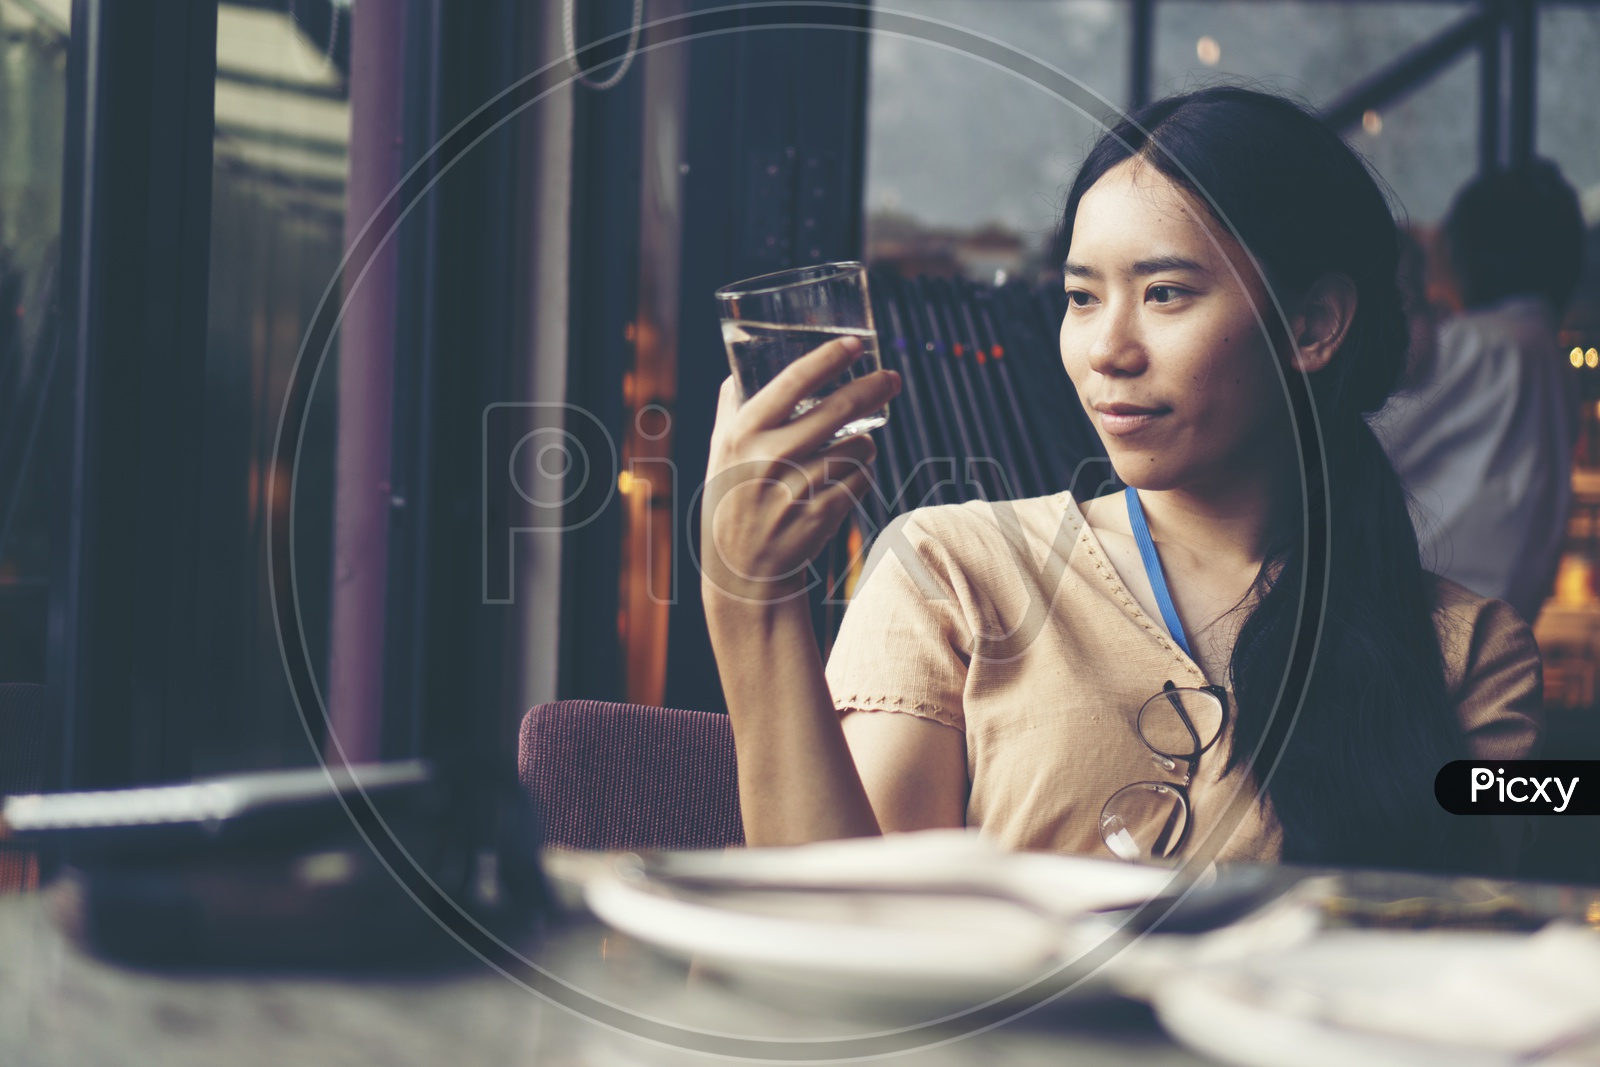 Asian Woman In A Cafe Holding a Water Glass With Smile On Face